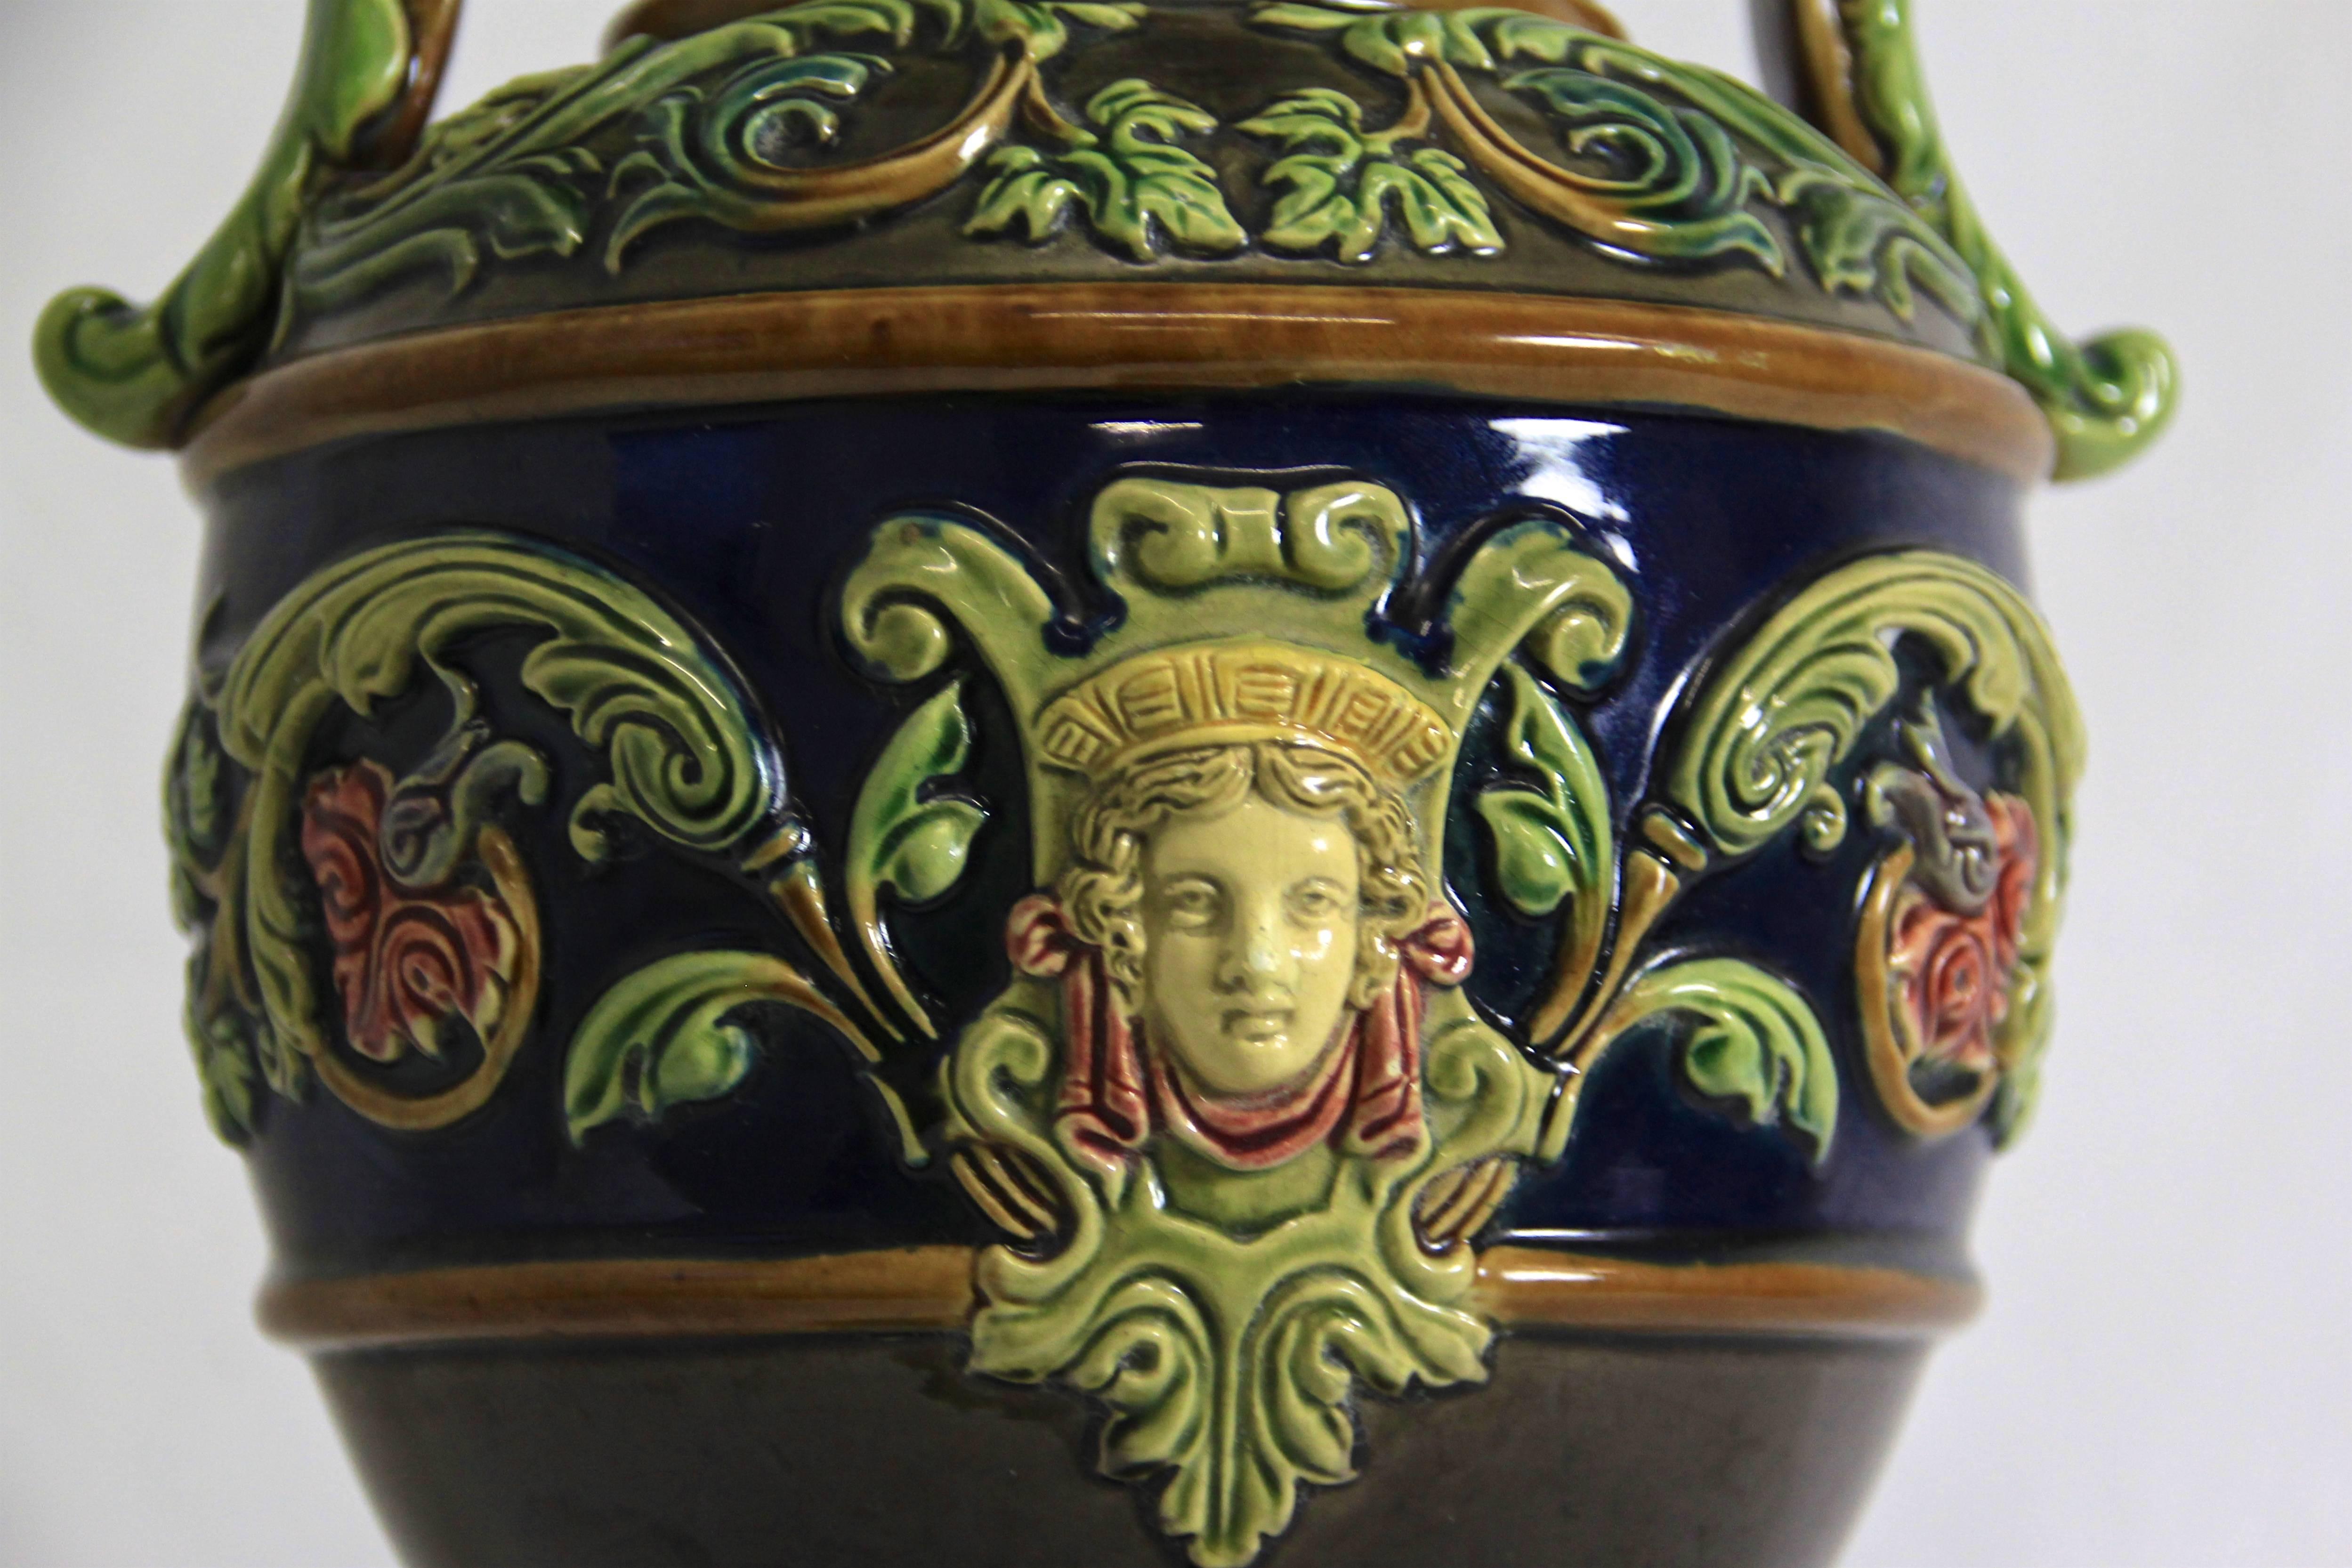 This amazing rare Majolica vase was made by the famous Austrian sculptor "Johann Maresch," circa 1880 in Bohemia (at that time Austria).
To find a model from JM like this is an absolute rarity. The last years we had a lot of nice pieces in